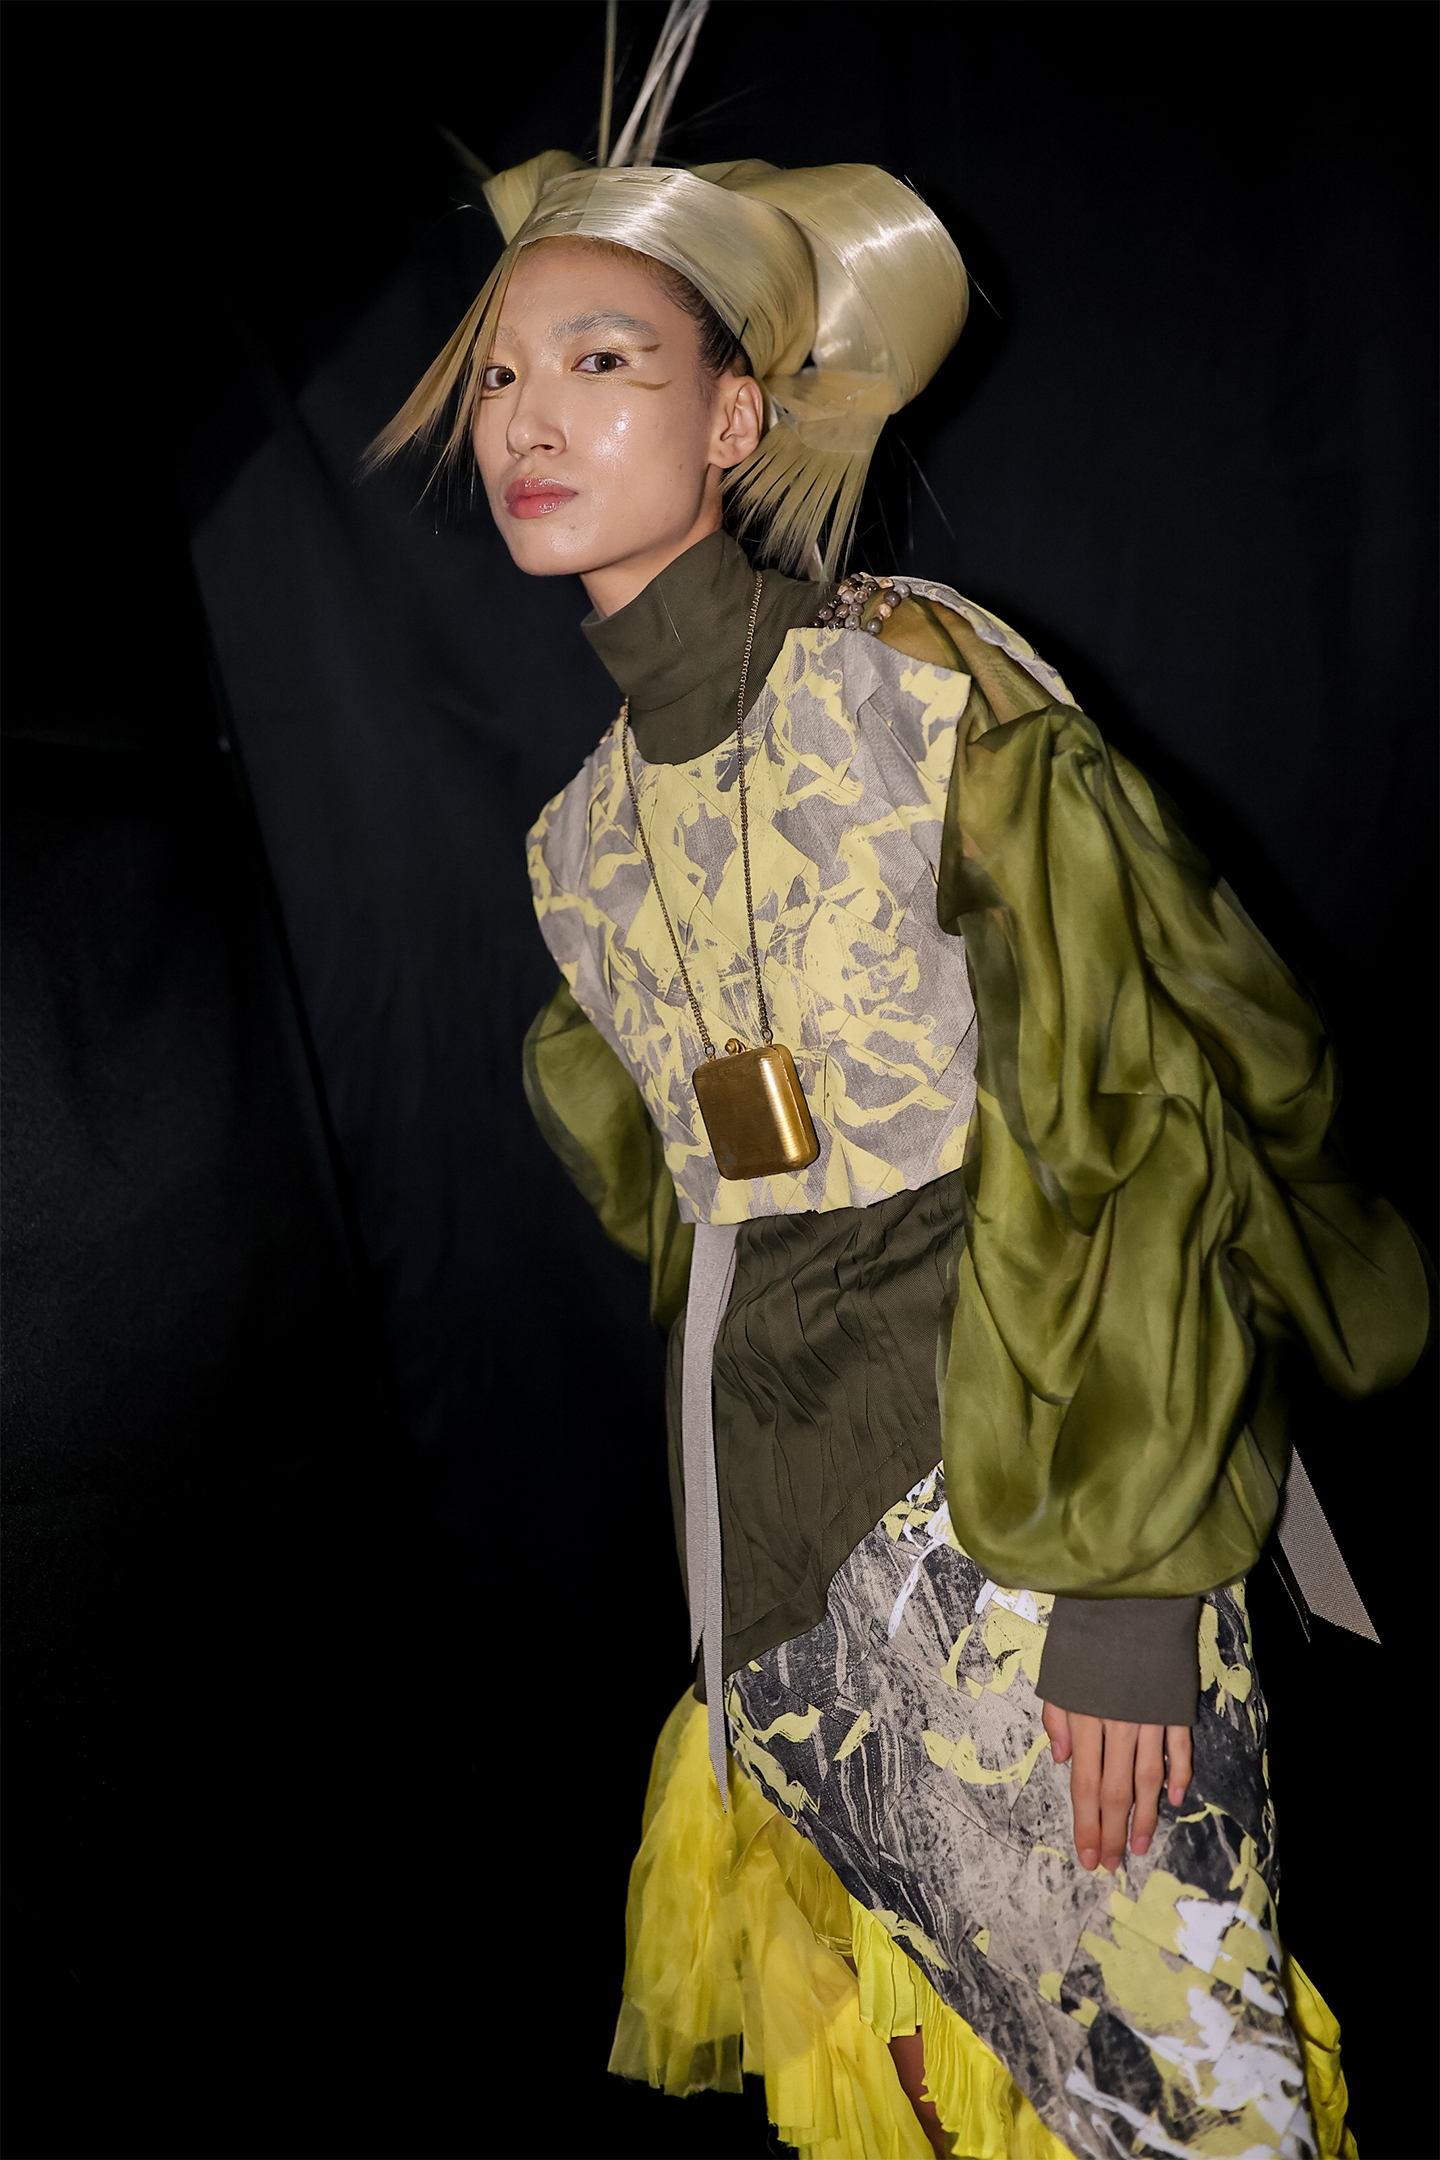 Model in a look by Istituto Marangoni Shenzhen Fashion Designer of The year 2023 Chen Tingting, wearing a special wig with customised hairstyle